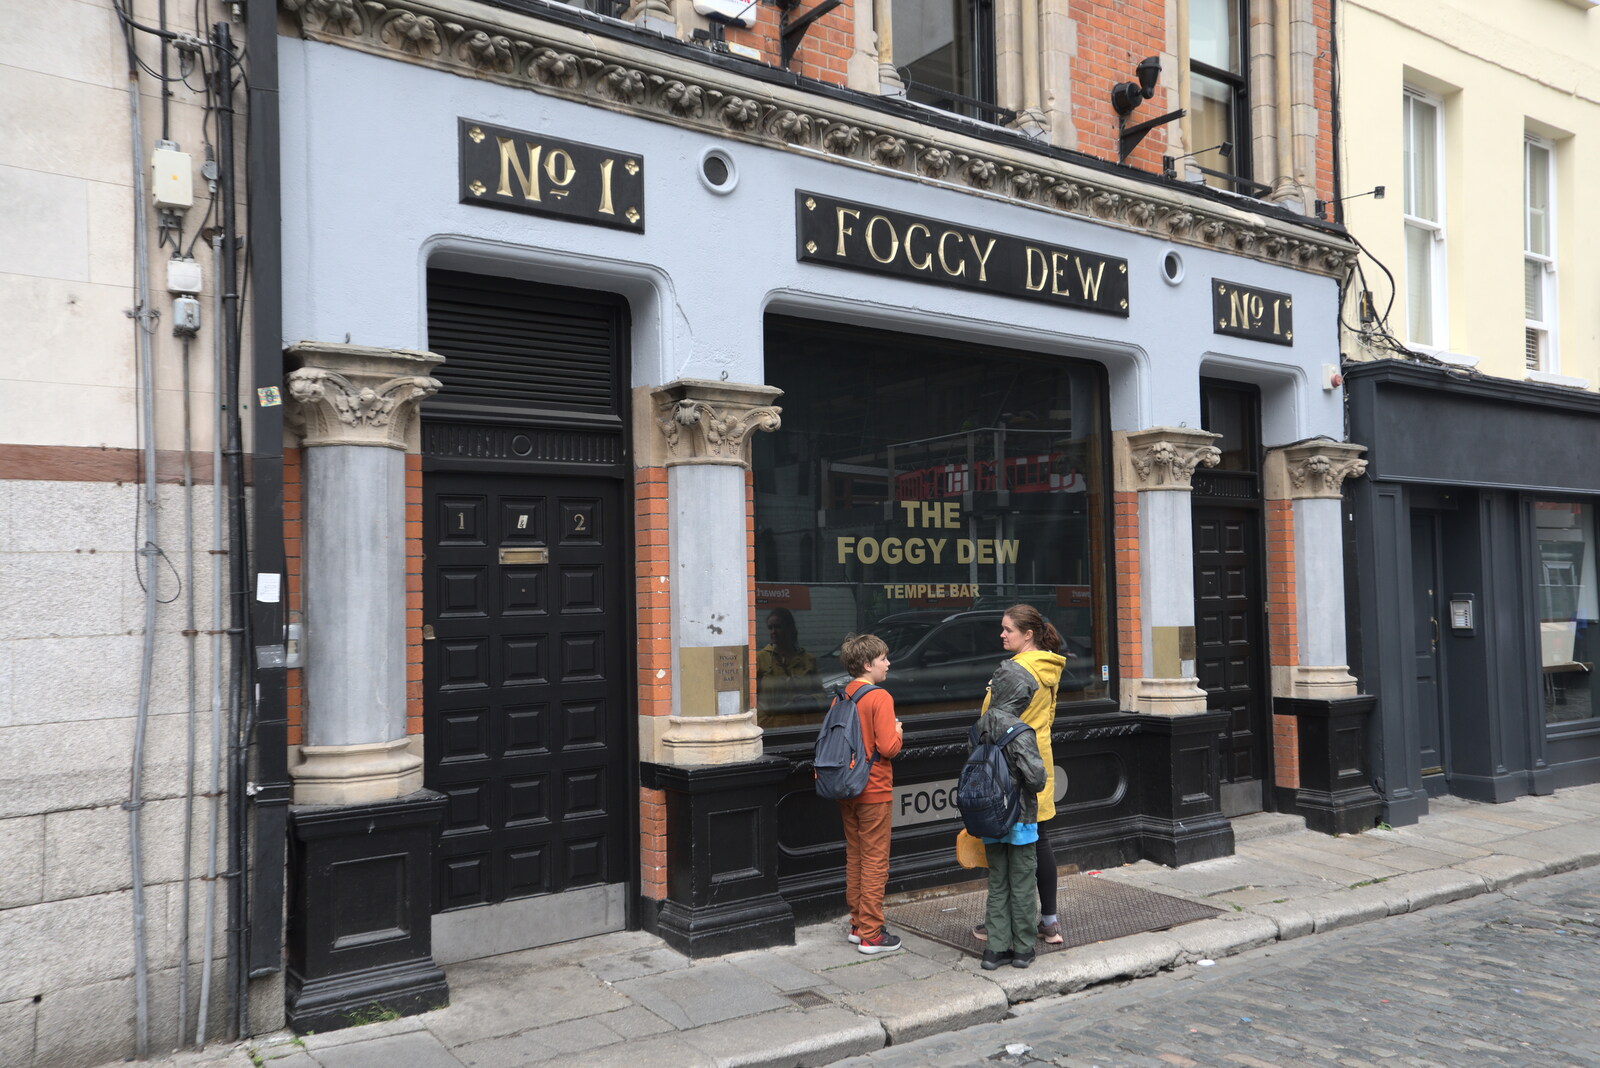 The legendary Foggy Dew, as in Fontaines DC from A Trip to Noddy's, and Dublin City Centre, Wicklow and Dublin, Ireland - 16th August 2021